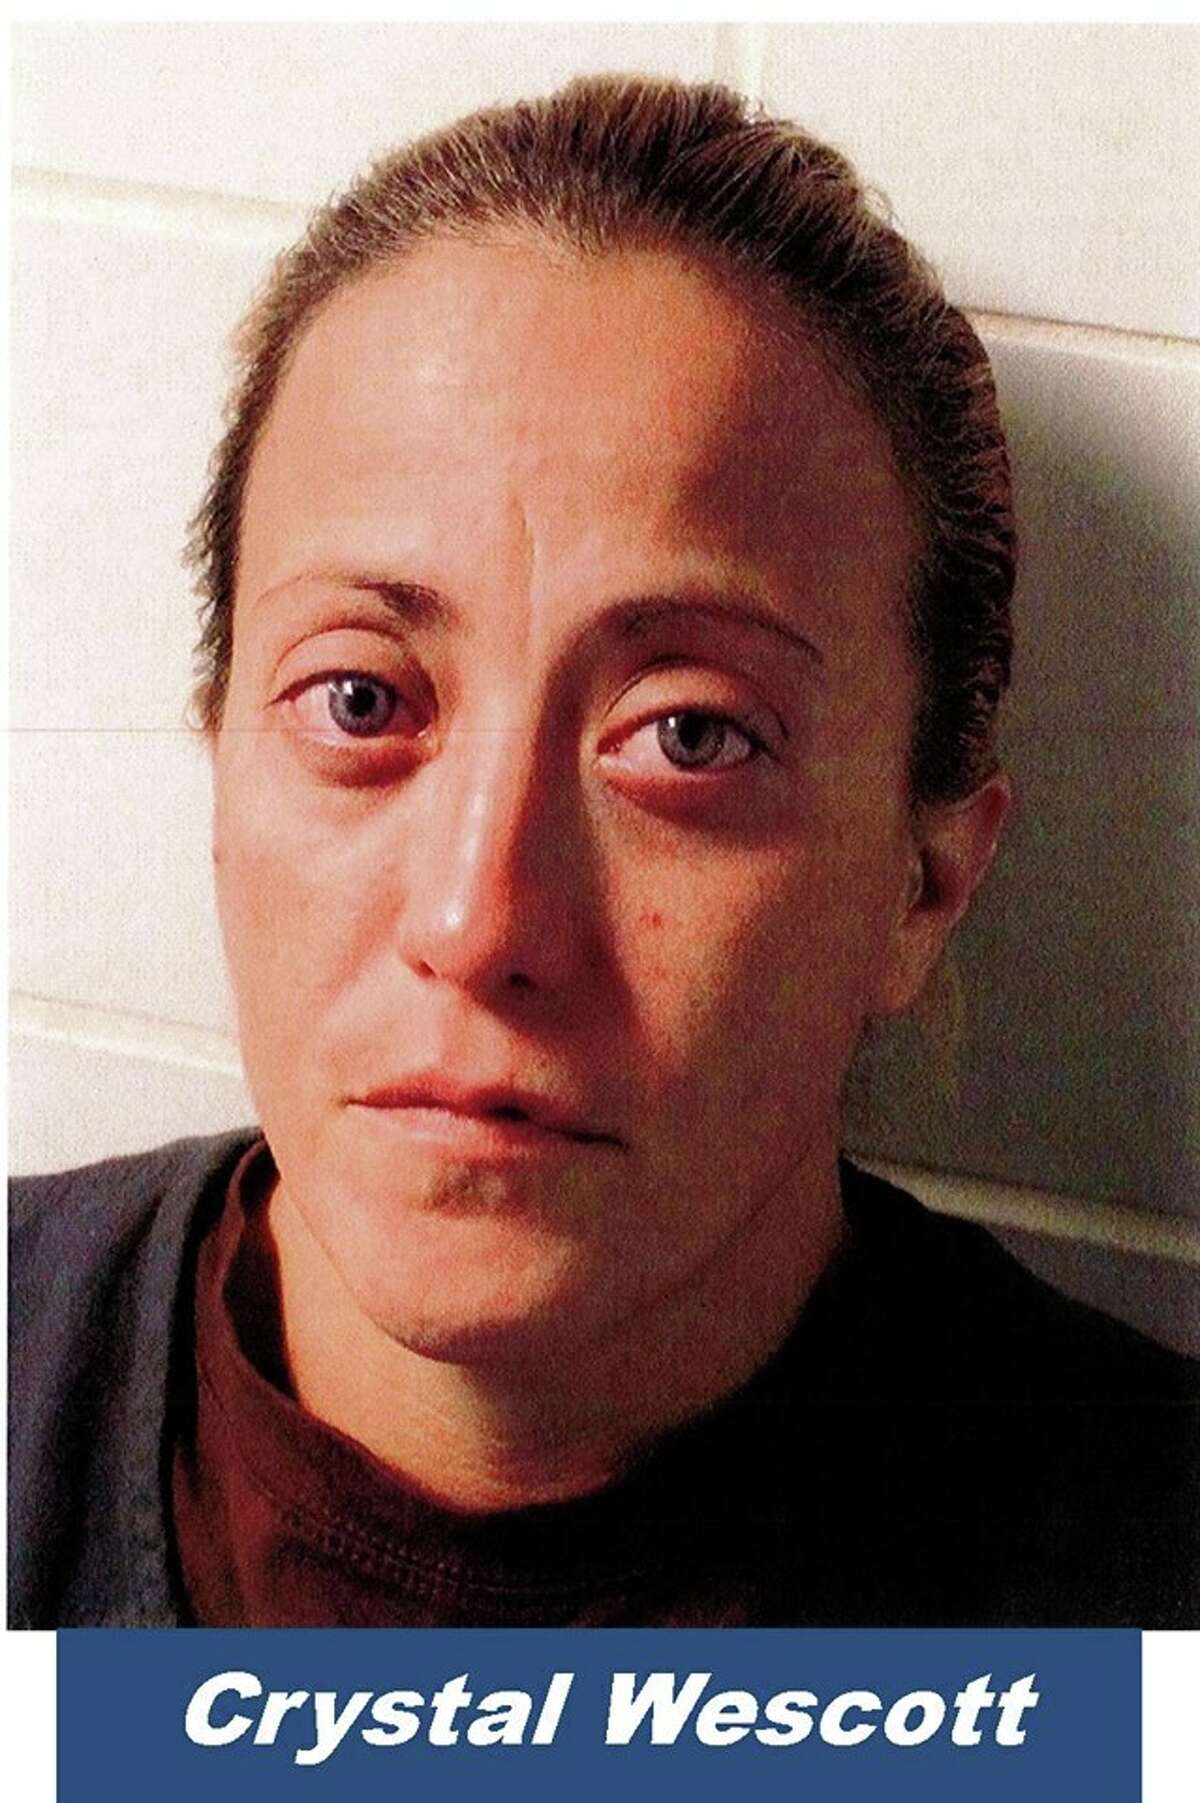 Crystal Wescott is facing federal drug charges after authorities allegedly caught her buying crystal meth.